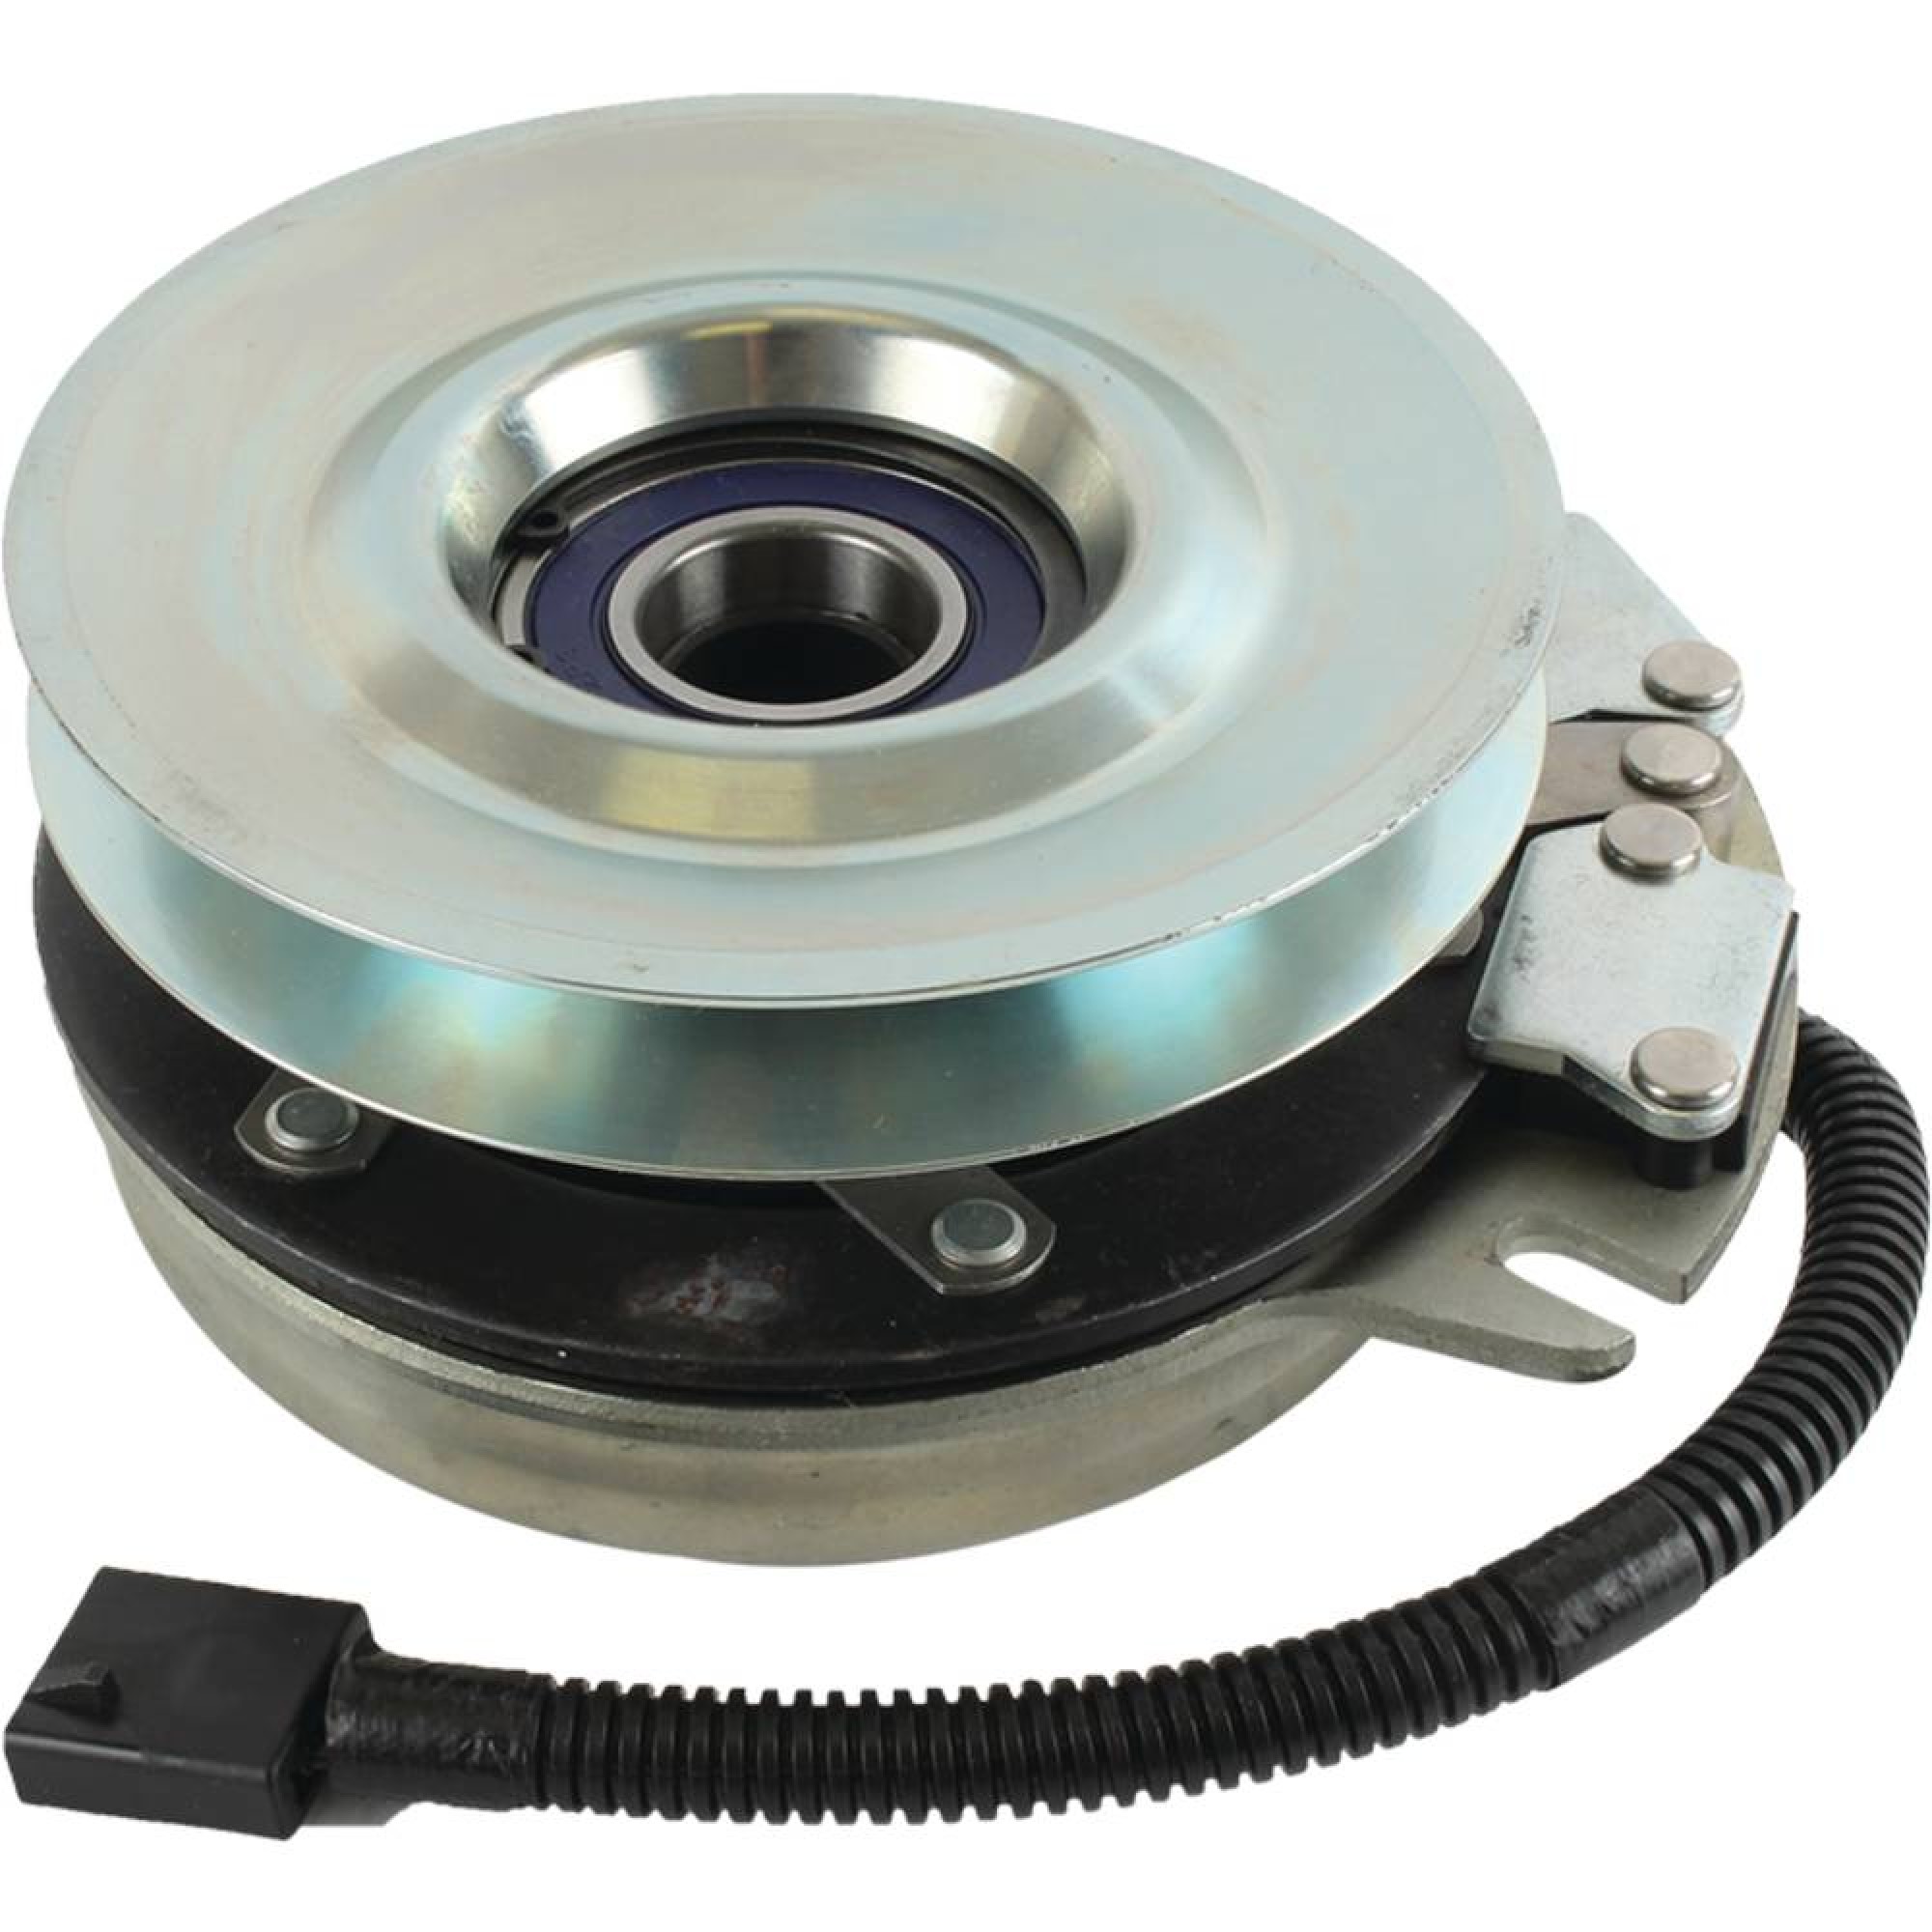 Xtreme PTO Clutch Replaces WARNER 5219-177 w/Heavy Duty Pulley Bearing Upgrade 